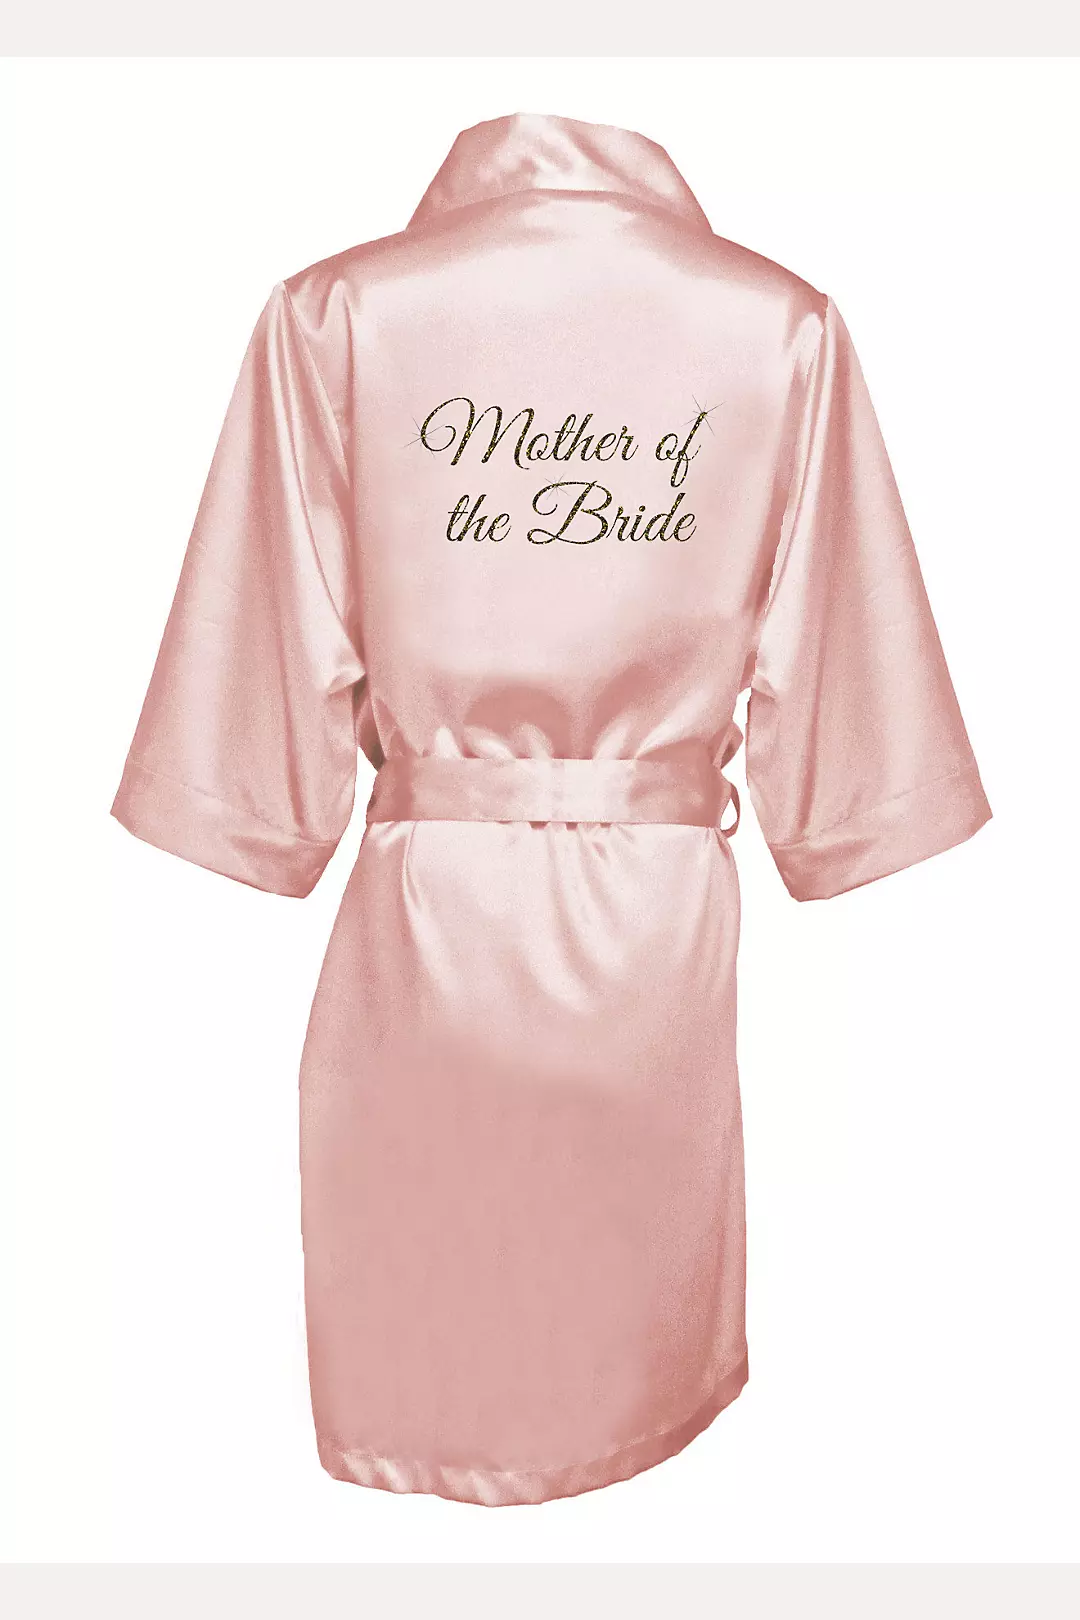 Glitter Print Mother of the Bride Satin Robe Image